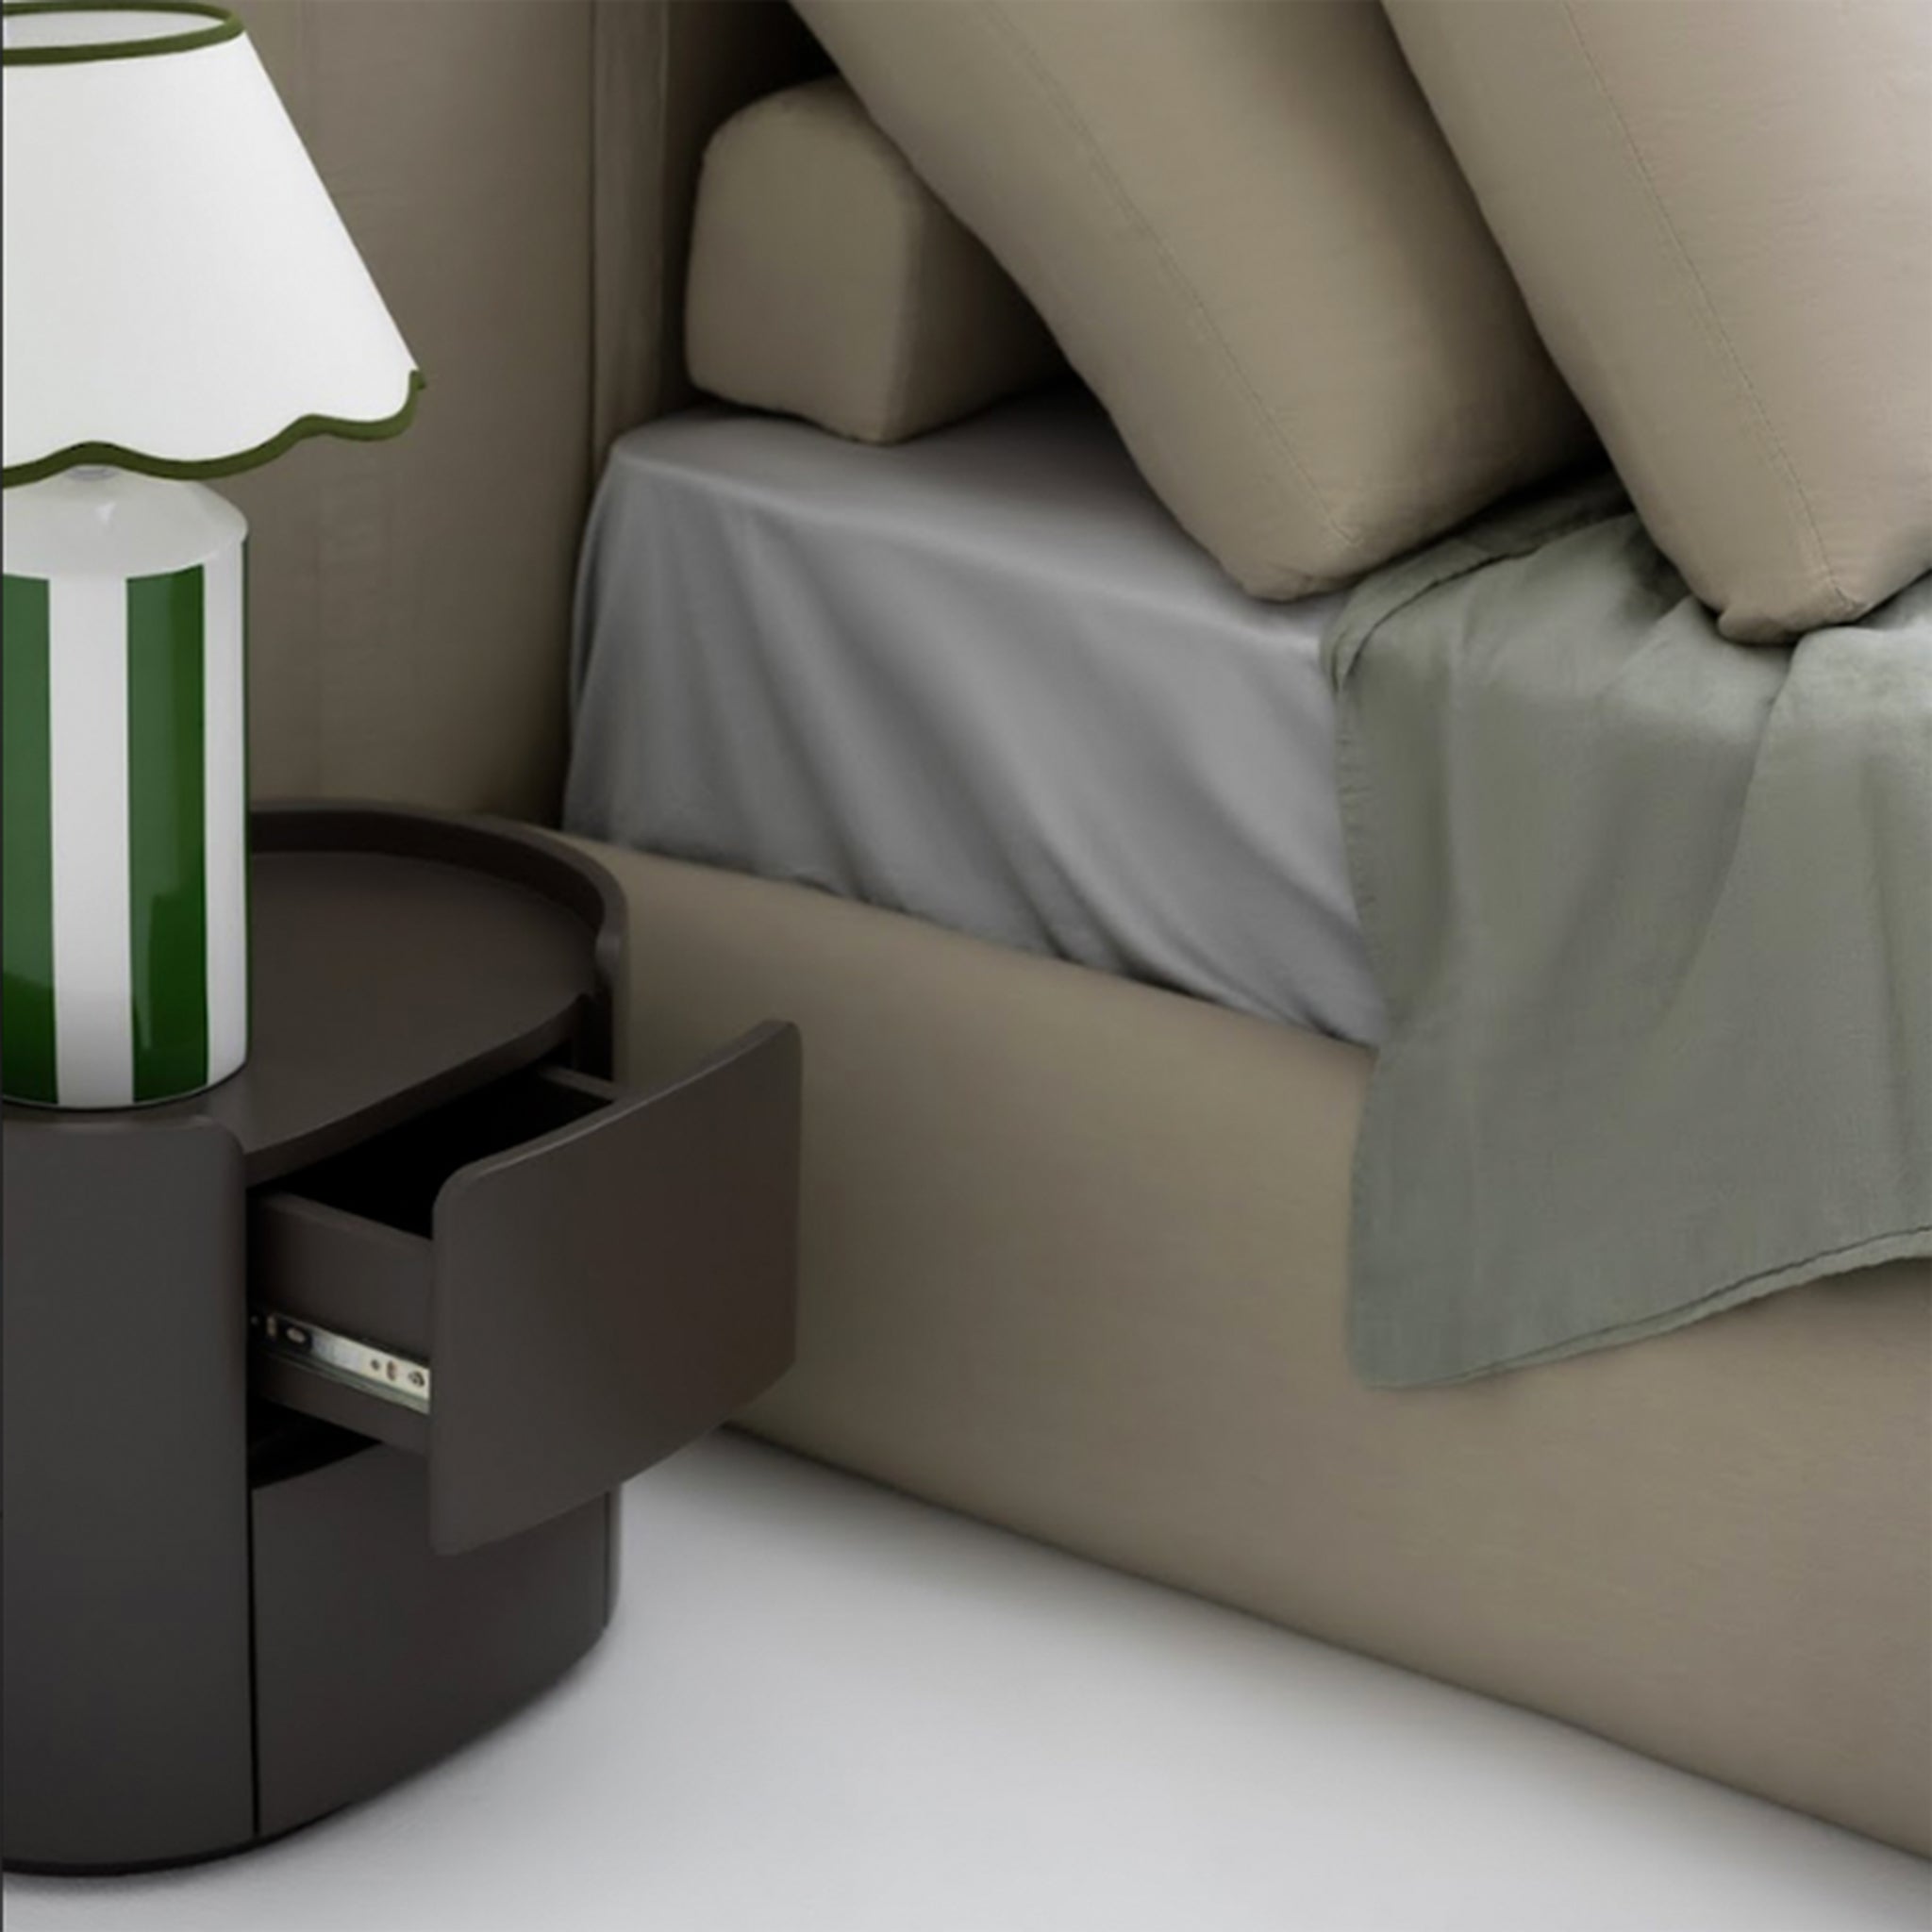 Close-up of a black cylindrical bedside table with an open drawer, next to a bed with beige bedding and gray sheets. A green and white striped table lamp sits on top of the table.